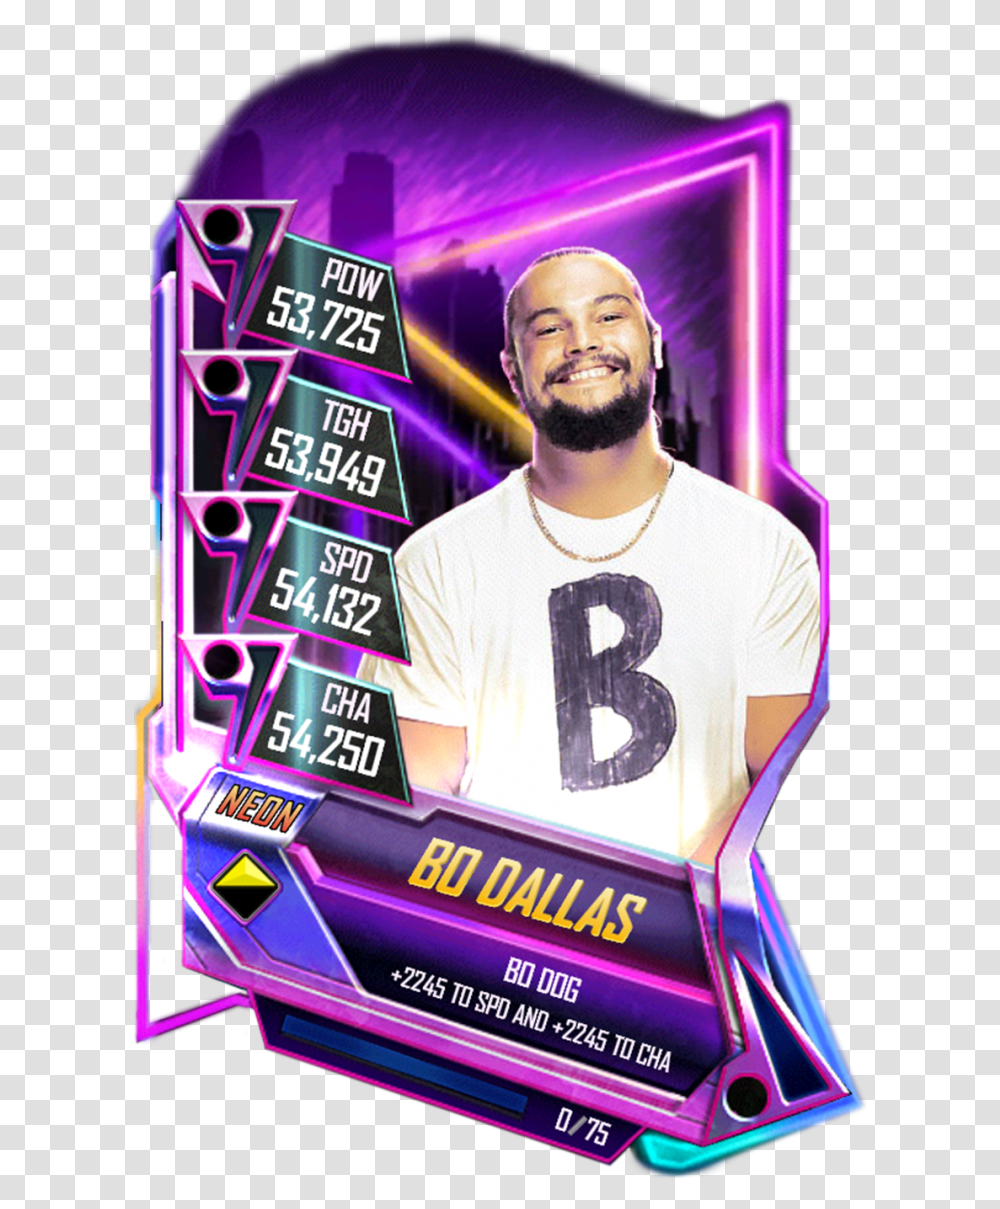 Neon Card Wwe Supercard Download Wwe Supercard Neon Pro, Person, Human, Poster, Advertisement Transparent Png